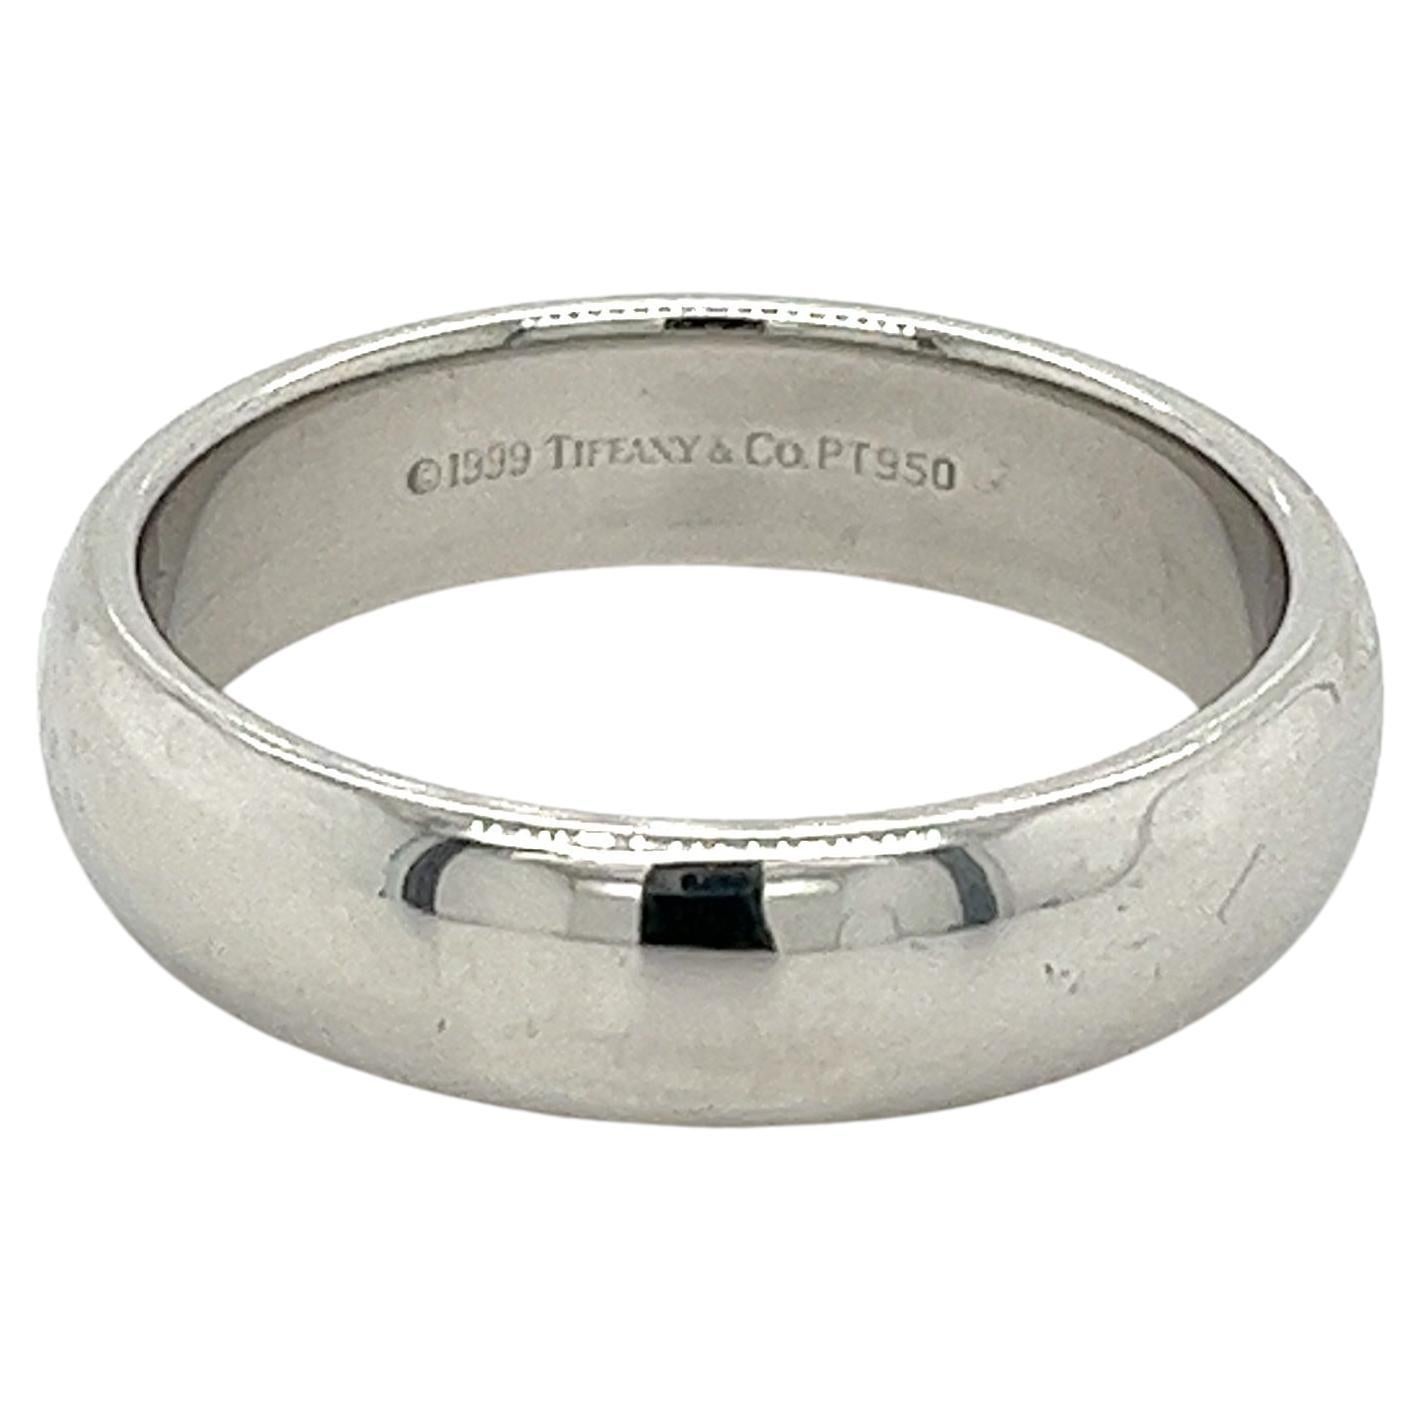 Tiffany & Co. Signed Platinum Mens Wedding Band Ring For Sale